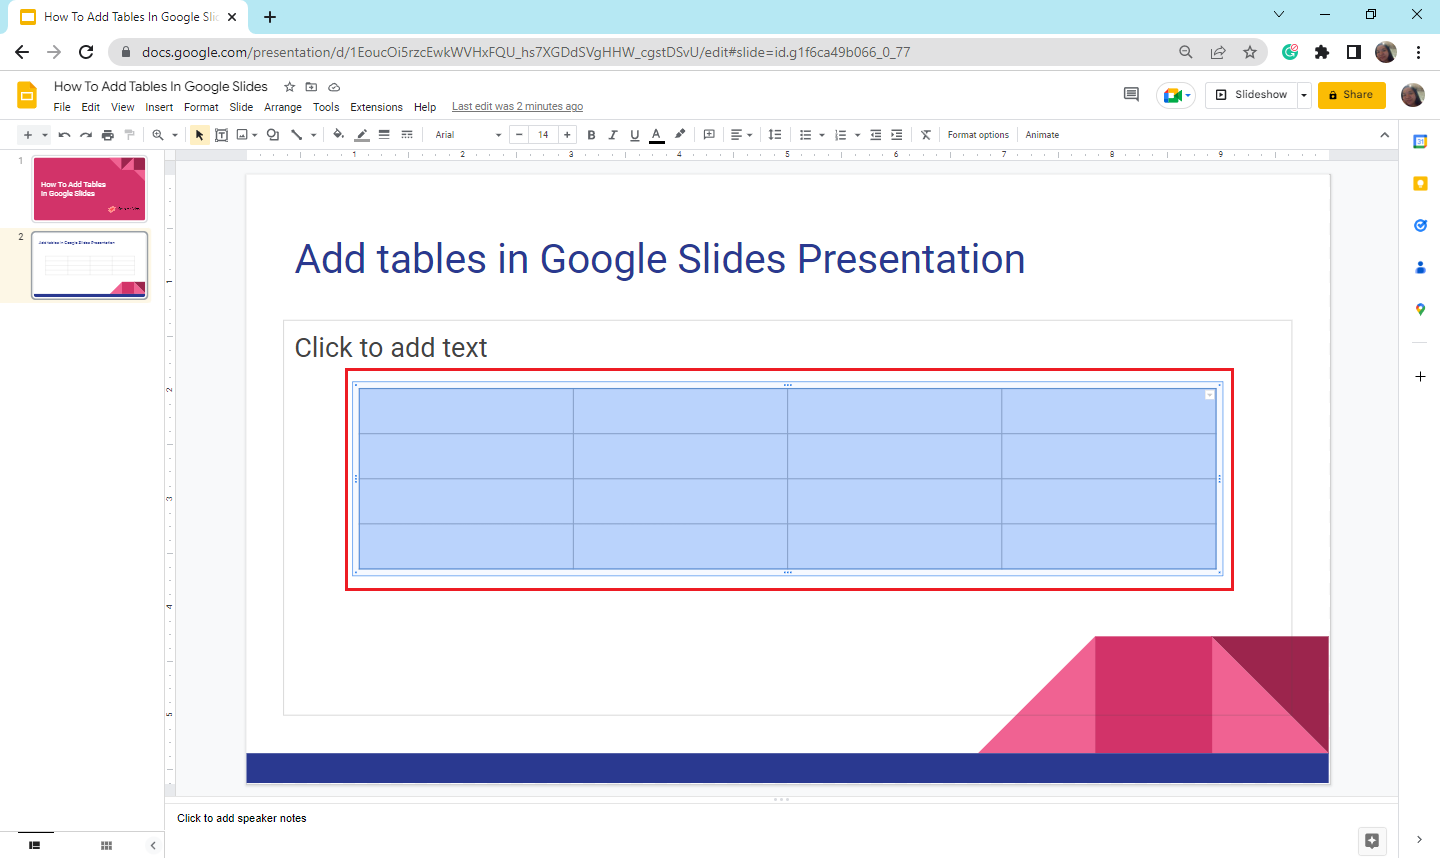 select the whole table in your Google slide where you want to edit tables.